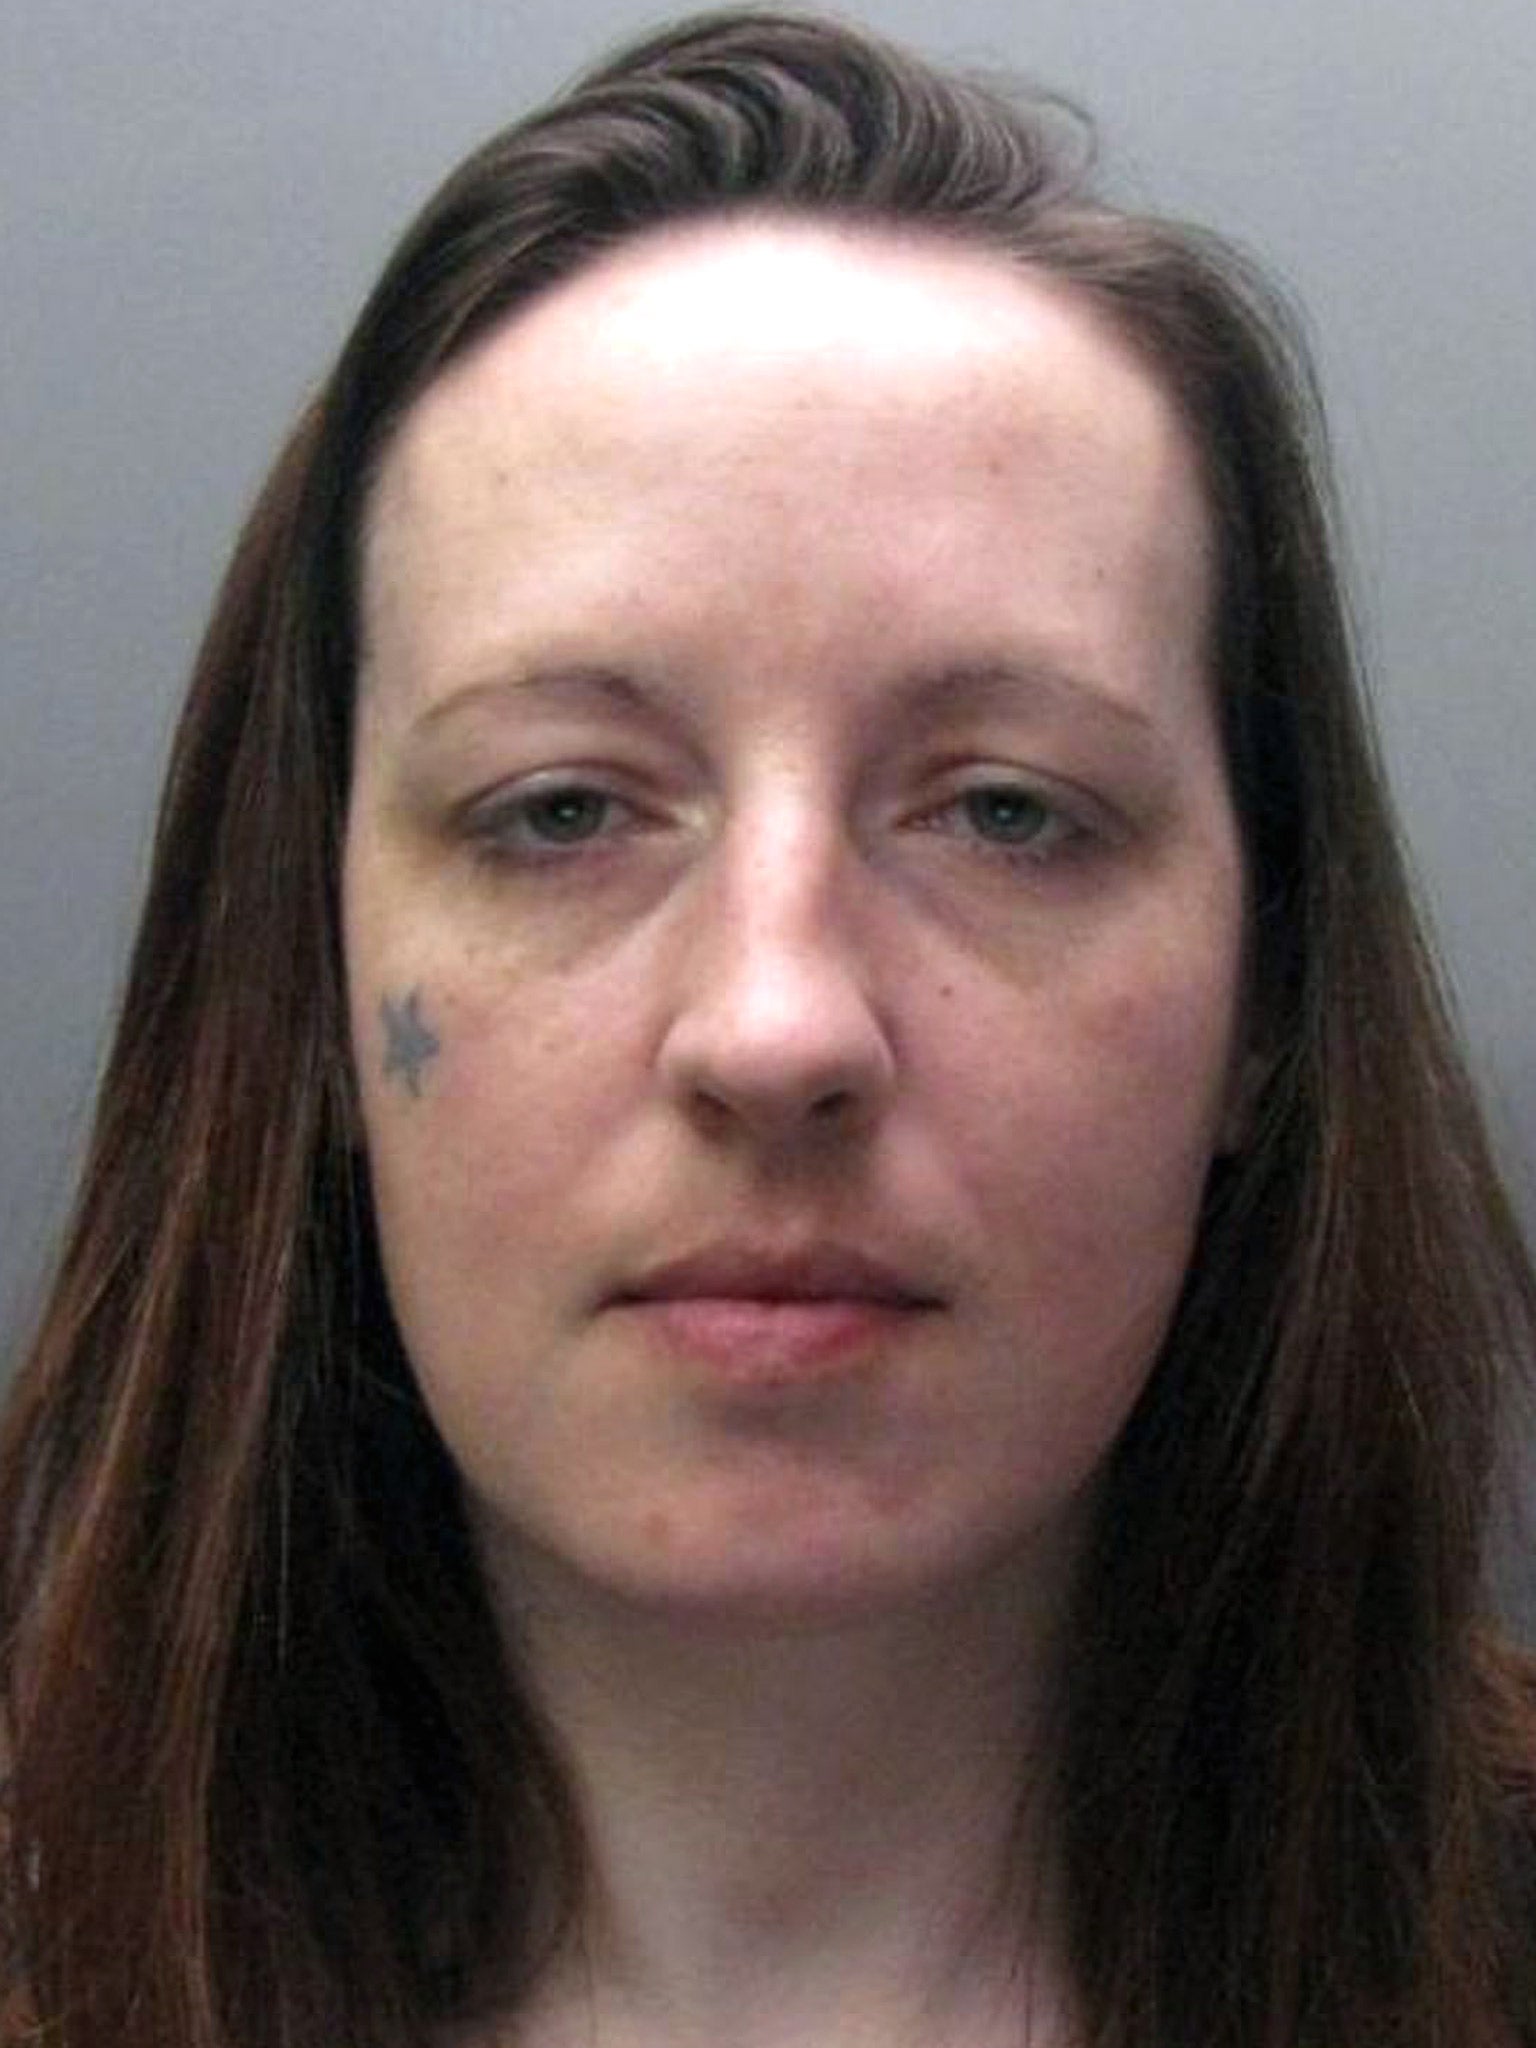 Joanna Dennehy remains at the prison, where she is serving a sentence for the murder of three men in a two-week killing spree